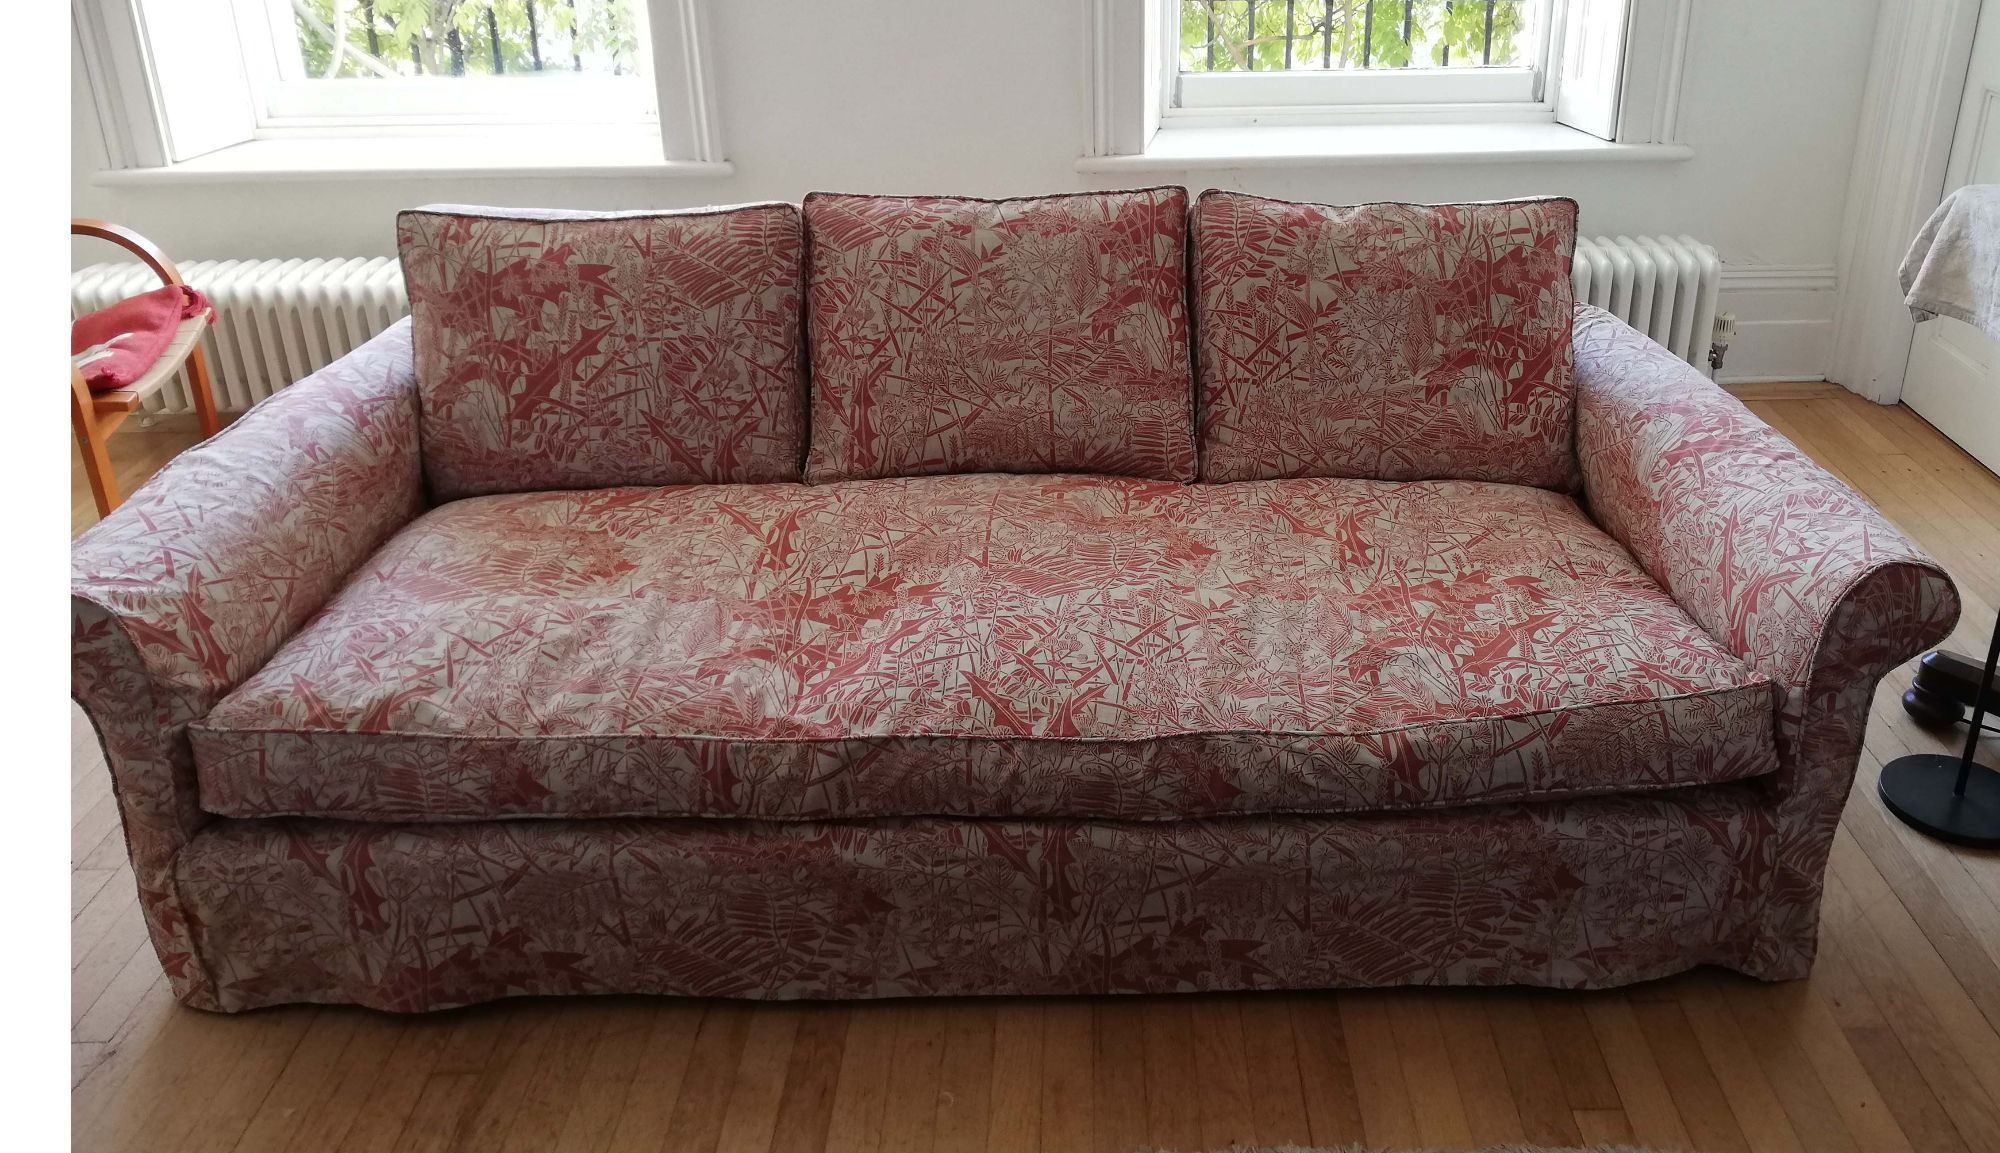 Patterned tailored sofa cover